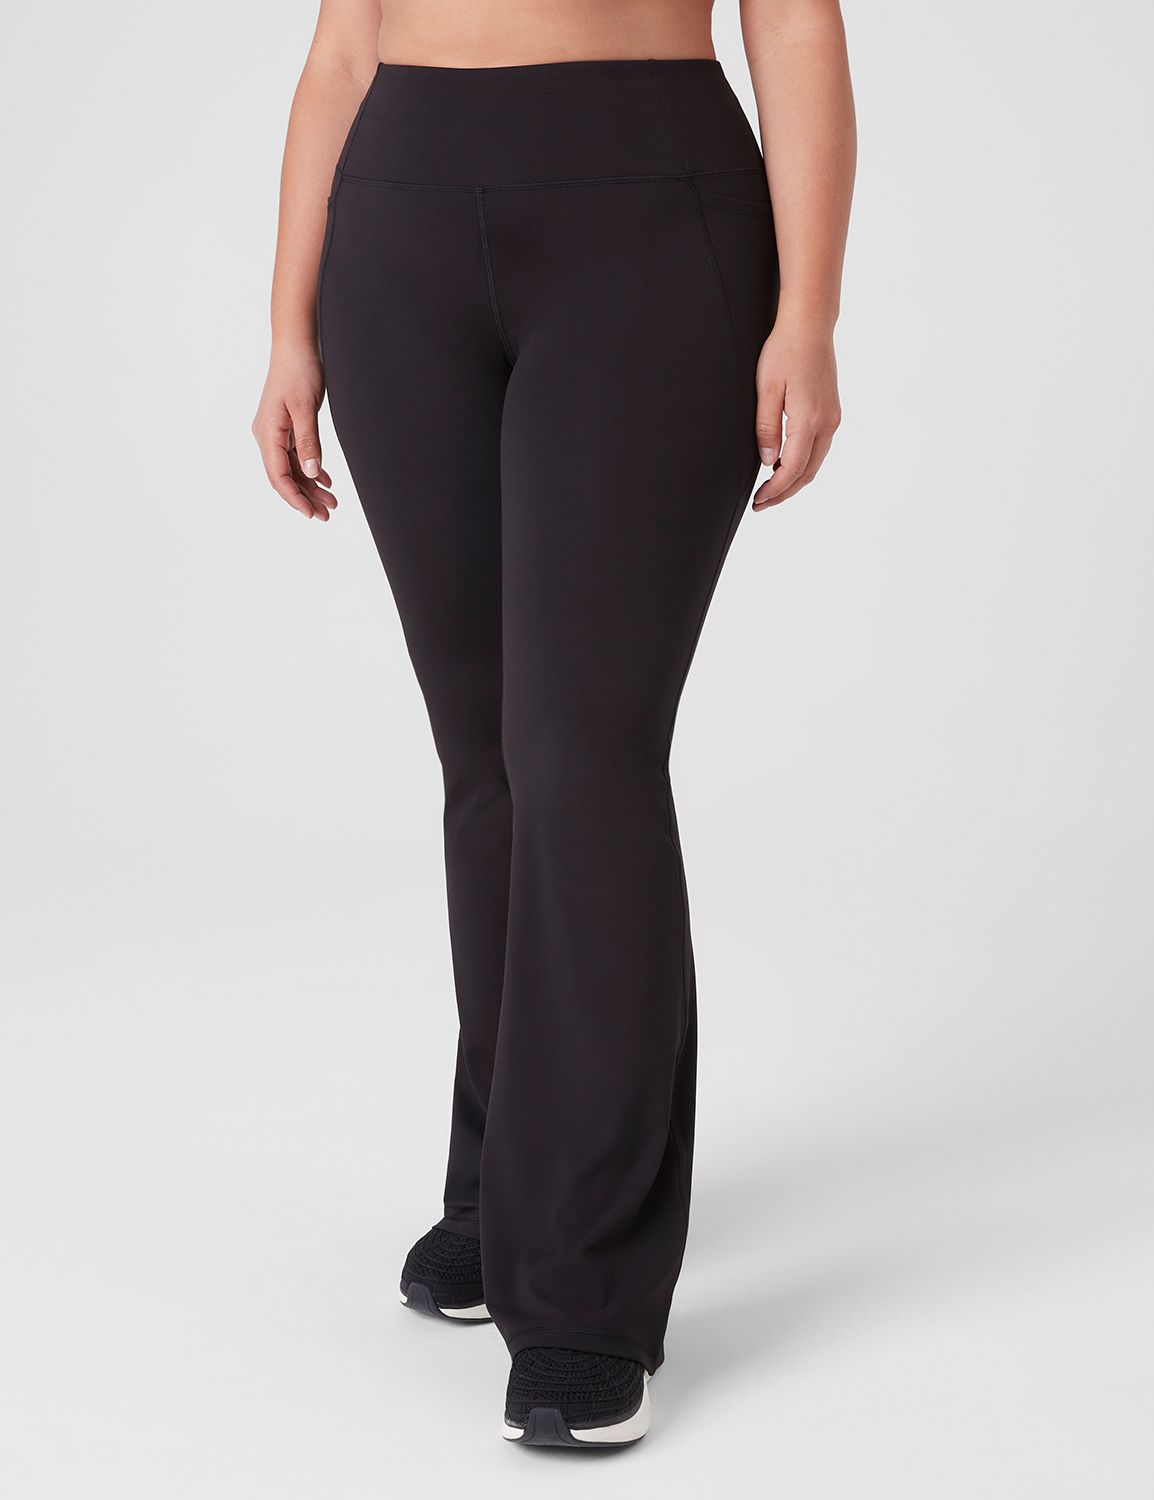 Lane Bryant - Why we 💙 LIVI leggings: Wider waistband for extra support  and comfort. Why we 💙 LIVI sports bras: Reversible (!) with supportive  stretch & wire-free cups. Shop